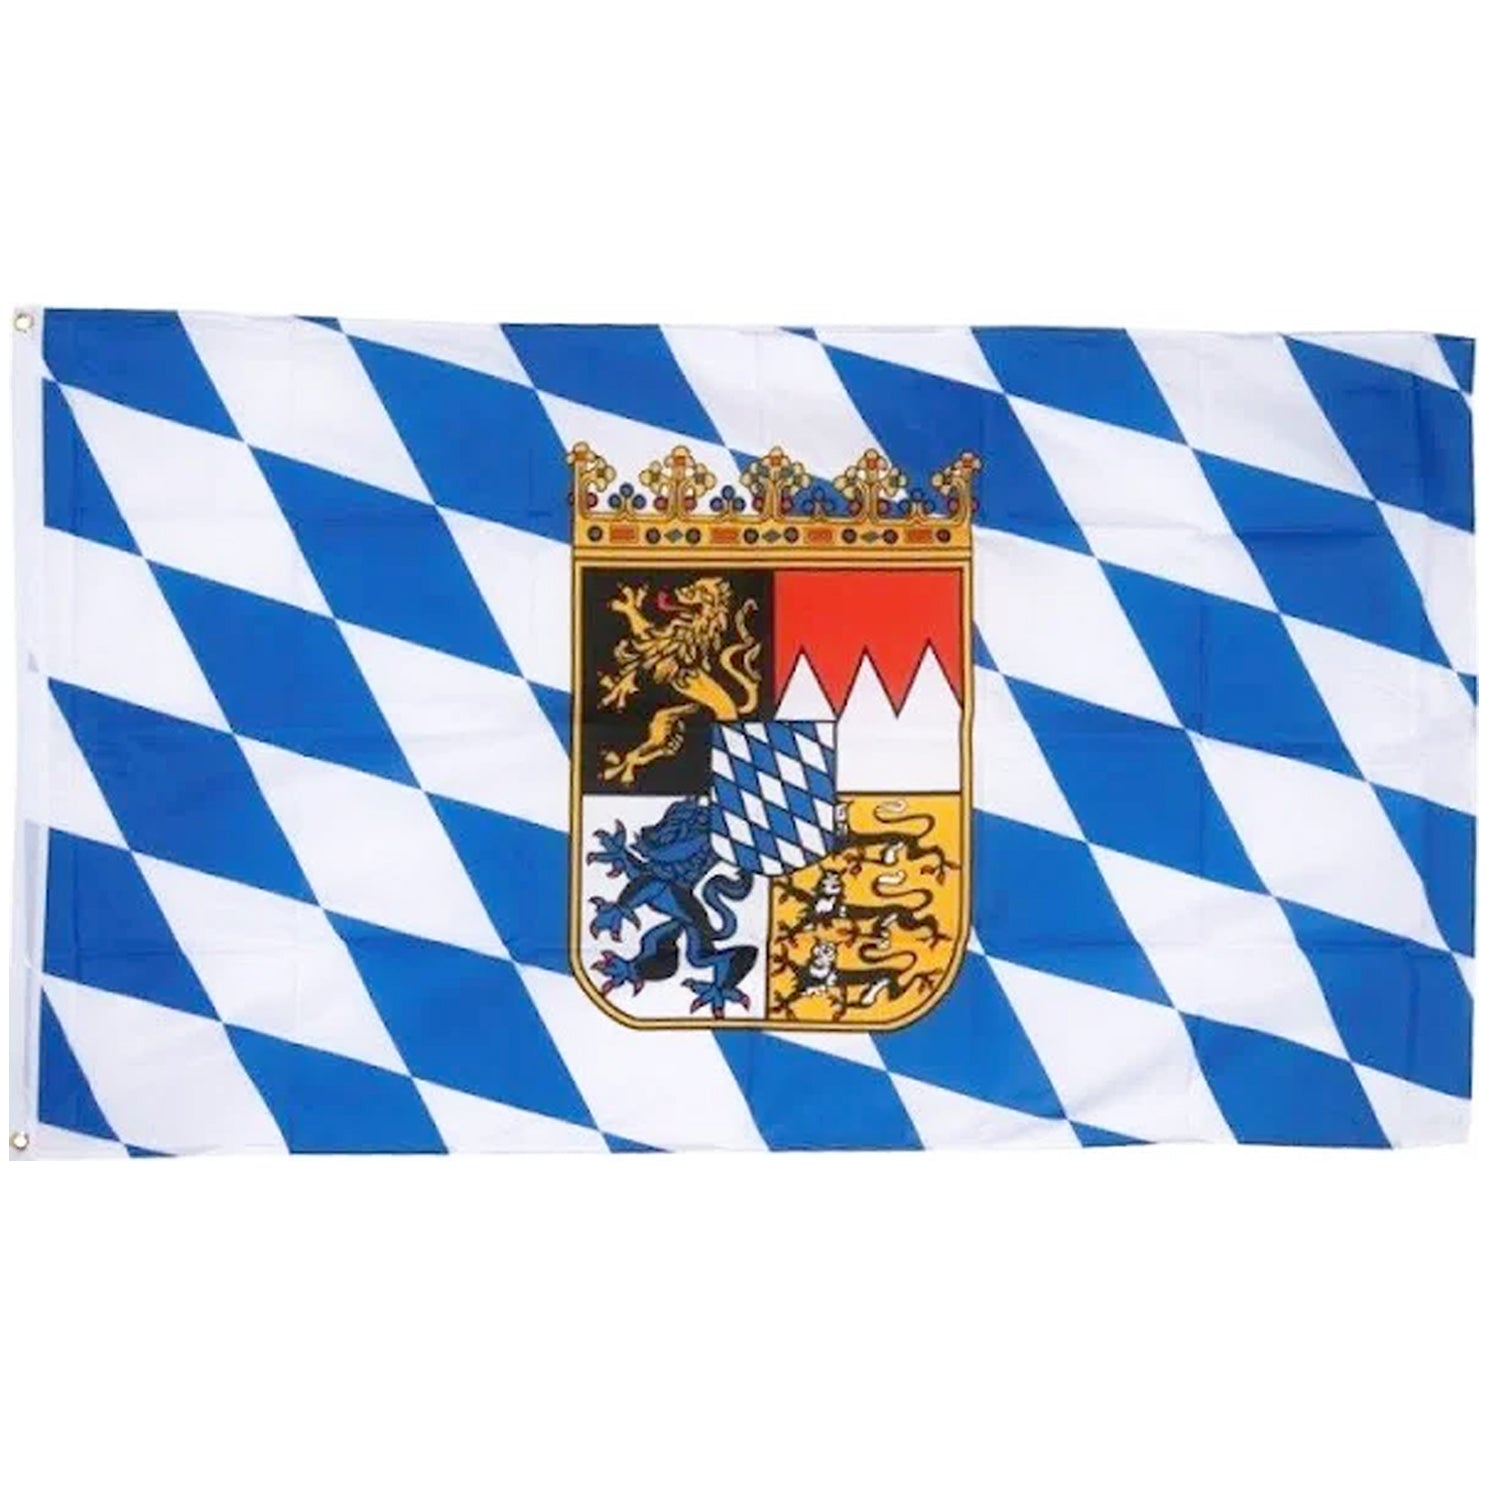 Bavaria with Crest Polyester Fabric Flag 5ft x 3ft